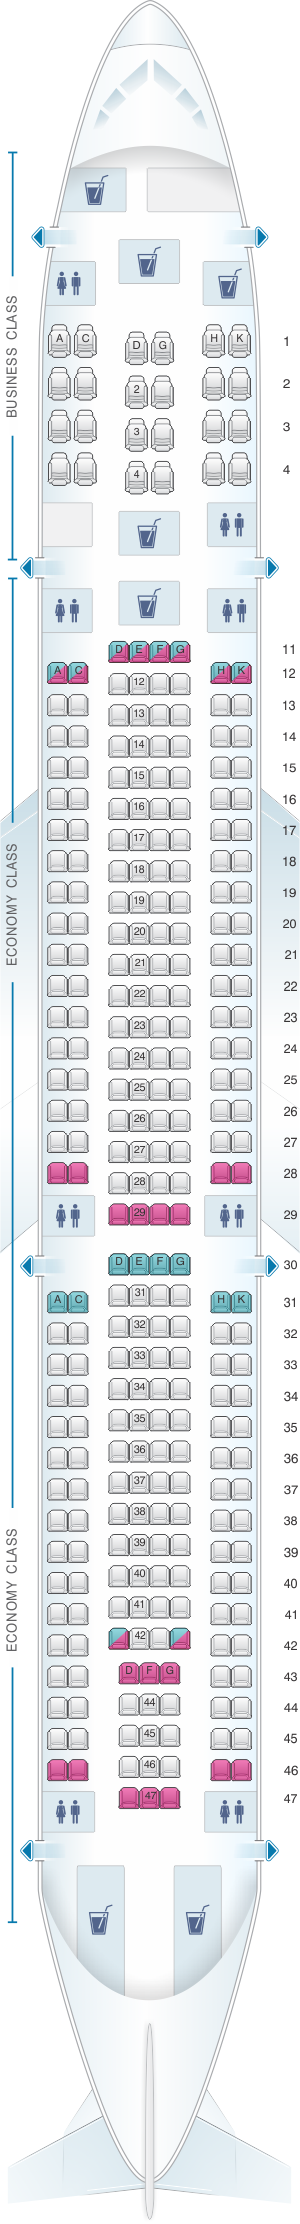 A340 500 Seating Chart